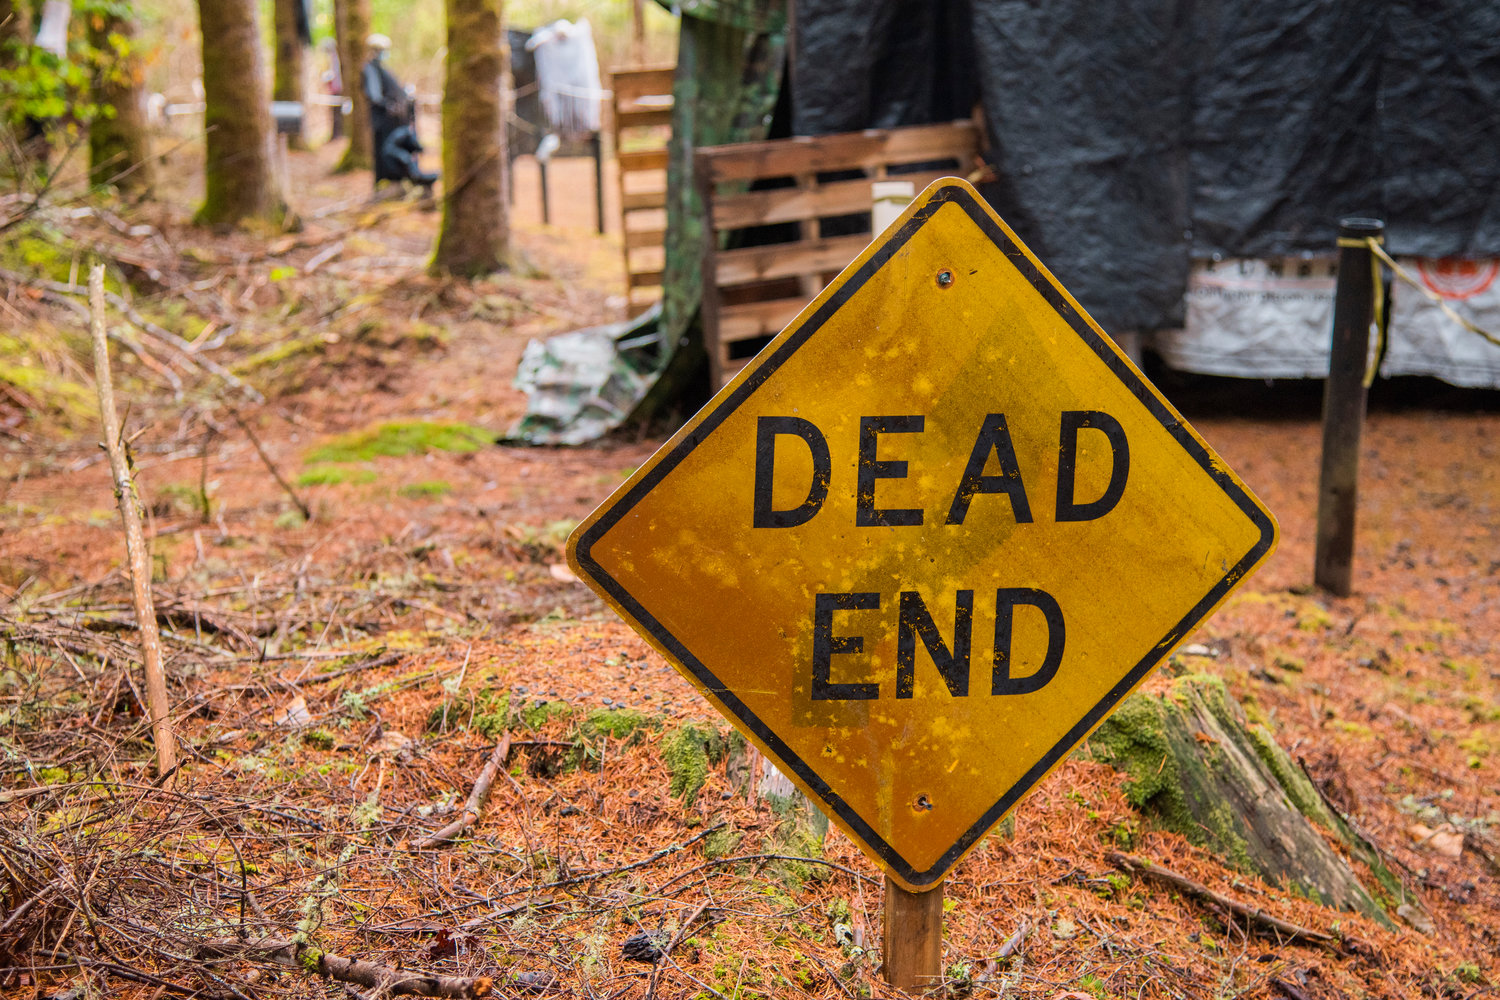 A “Dead End” sign is displayed along the path in the haunted forest at The Huntting’s Farm in Cinebar.